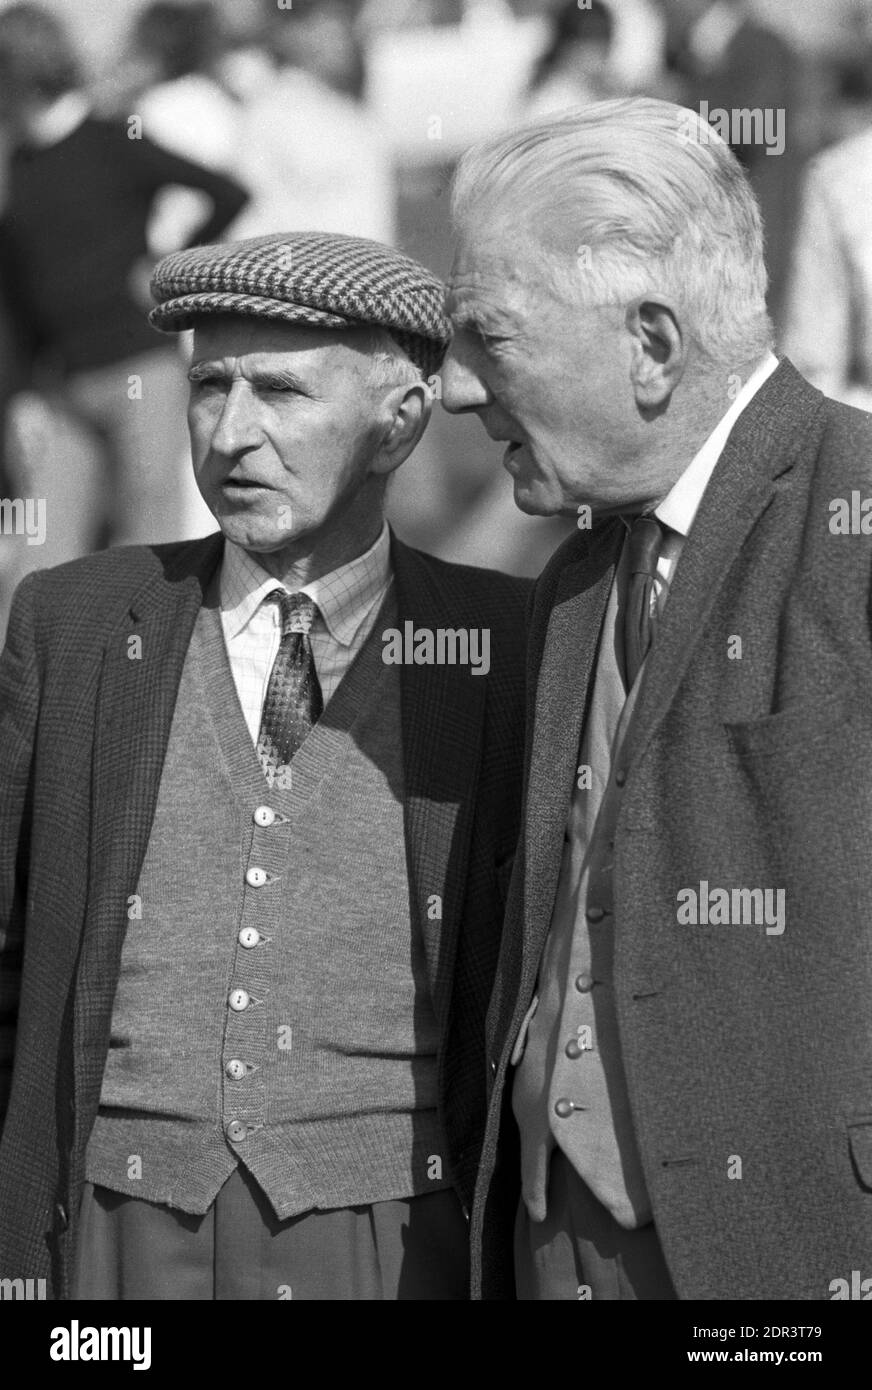 UK, England, Devonshire, Buckfastleigh, 1972. Point-to-Point races were held at  Dean Court on the Dean Marshes, close to the A38 between Plymouth and Exeter. Two traditional country gentlemen (probably farmers) talking. They are wearing a jacket, waistcoat, tie and one has a wool tweed flat cap on his head. Stock Photo